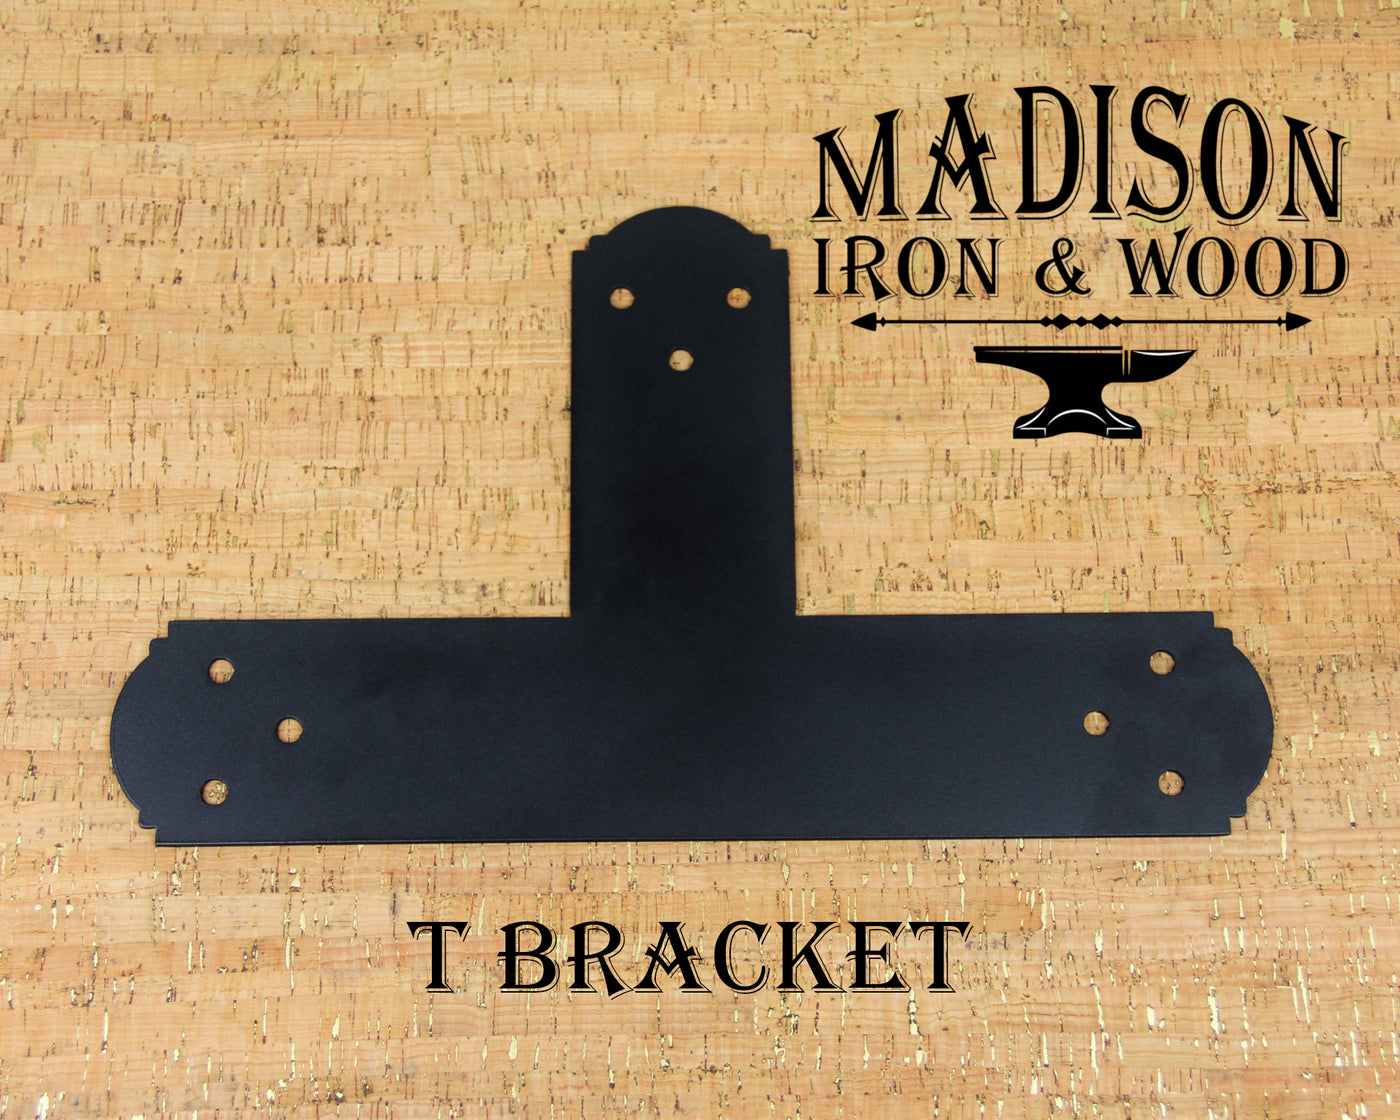 Crowned Brackets for 4x4 Dimensional Lumber - Madison Iron and Wood - Brackets - metal outdoor decor - Steel deocrations - american made products - veteran owned business products - fencing decorations - fencing supplies - custom wall decorations - personalized wall signs - steel - decorative post caps - steel post caps - metal post caps - brackets - structural brackets - home improvement - easter - easter decorations - easter gift - easter yard decor